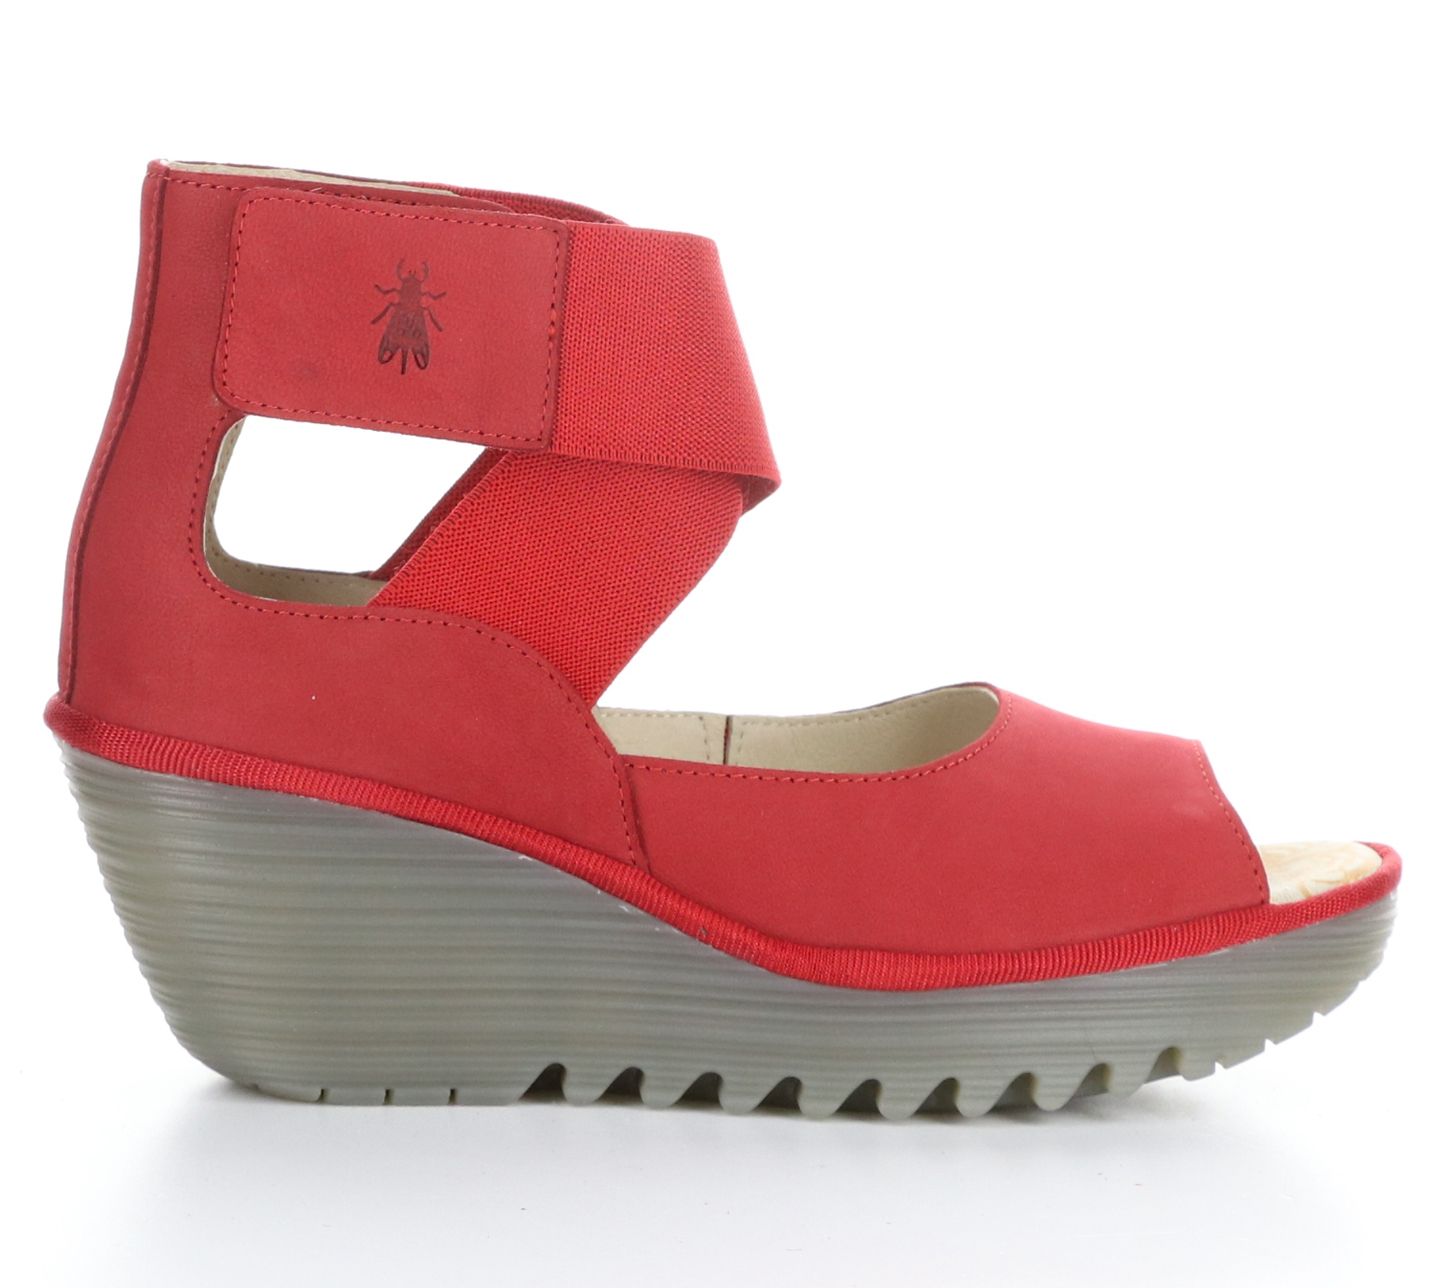 Fly London Suede Wedges - Yefi - QVC.com